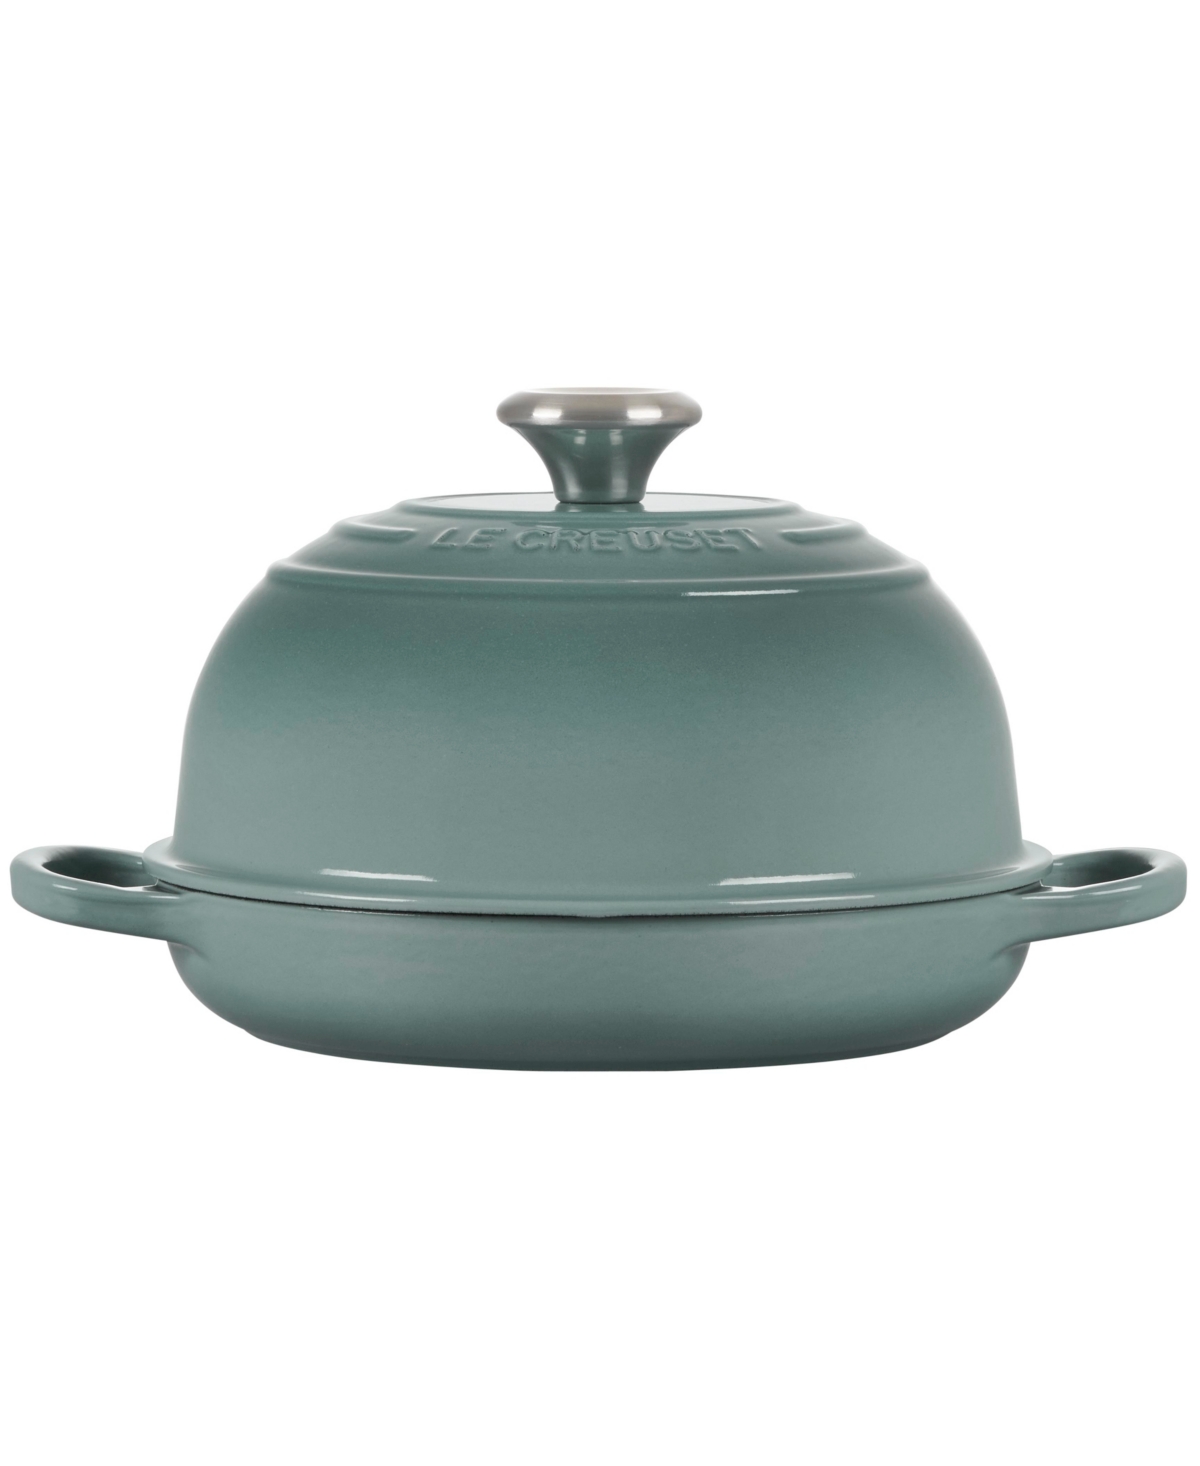 Le Creuset 1.75 Qt Enameled Cast Iron Bread Oven With Lid In Sea Salt